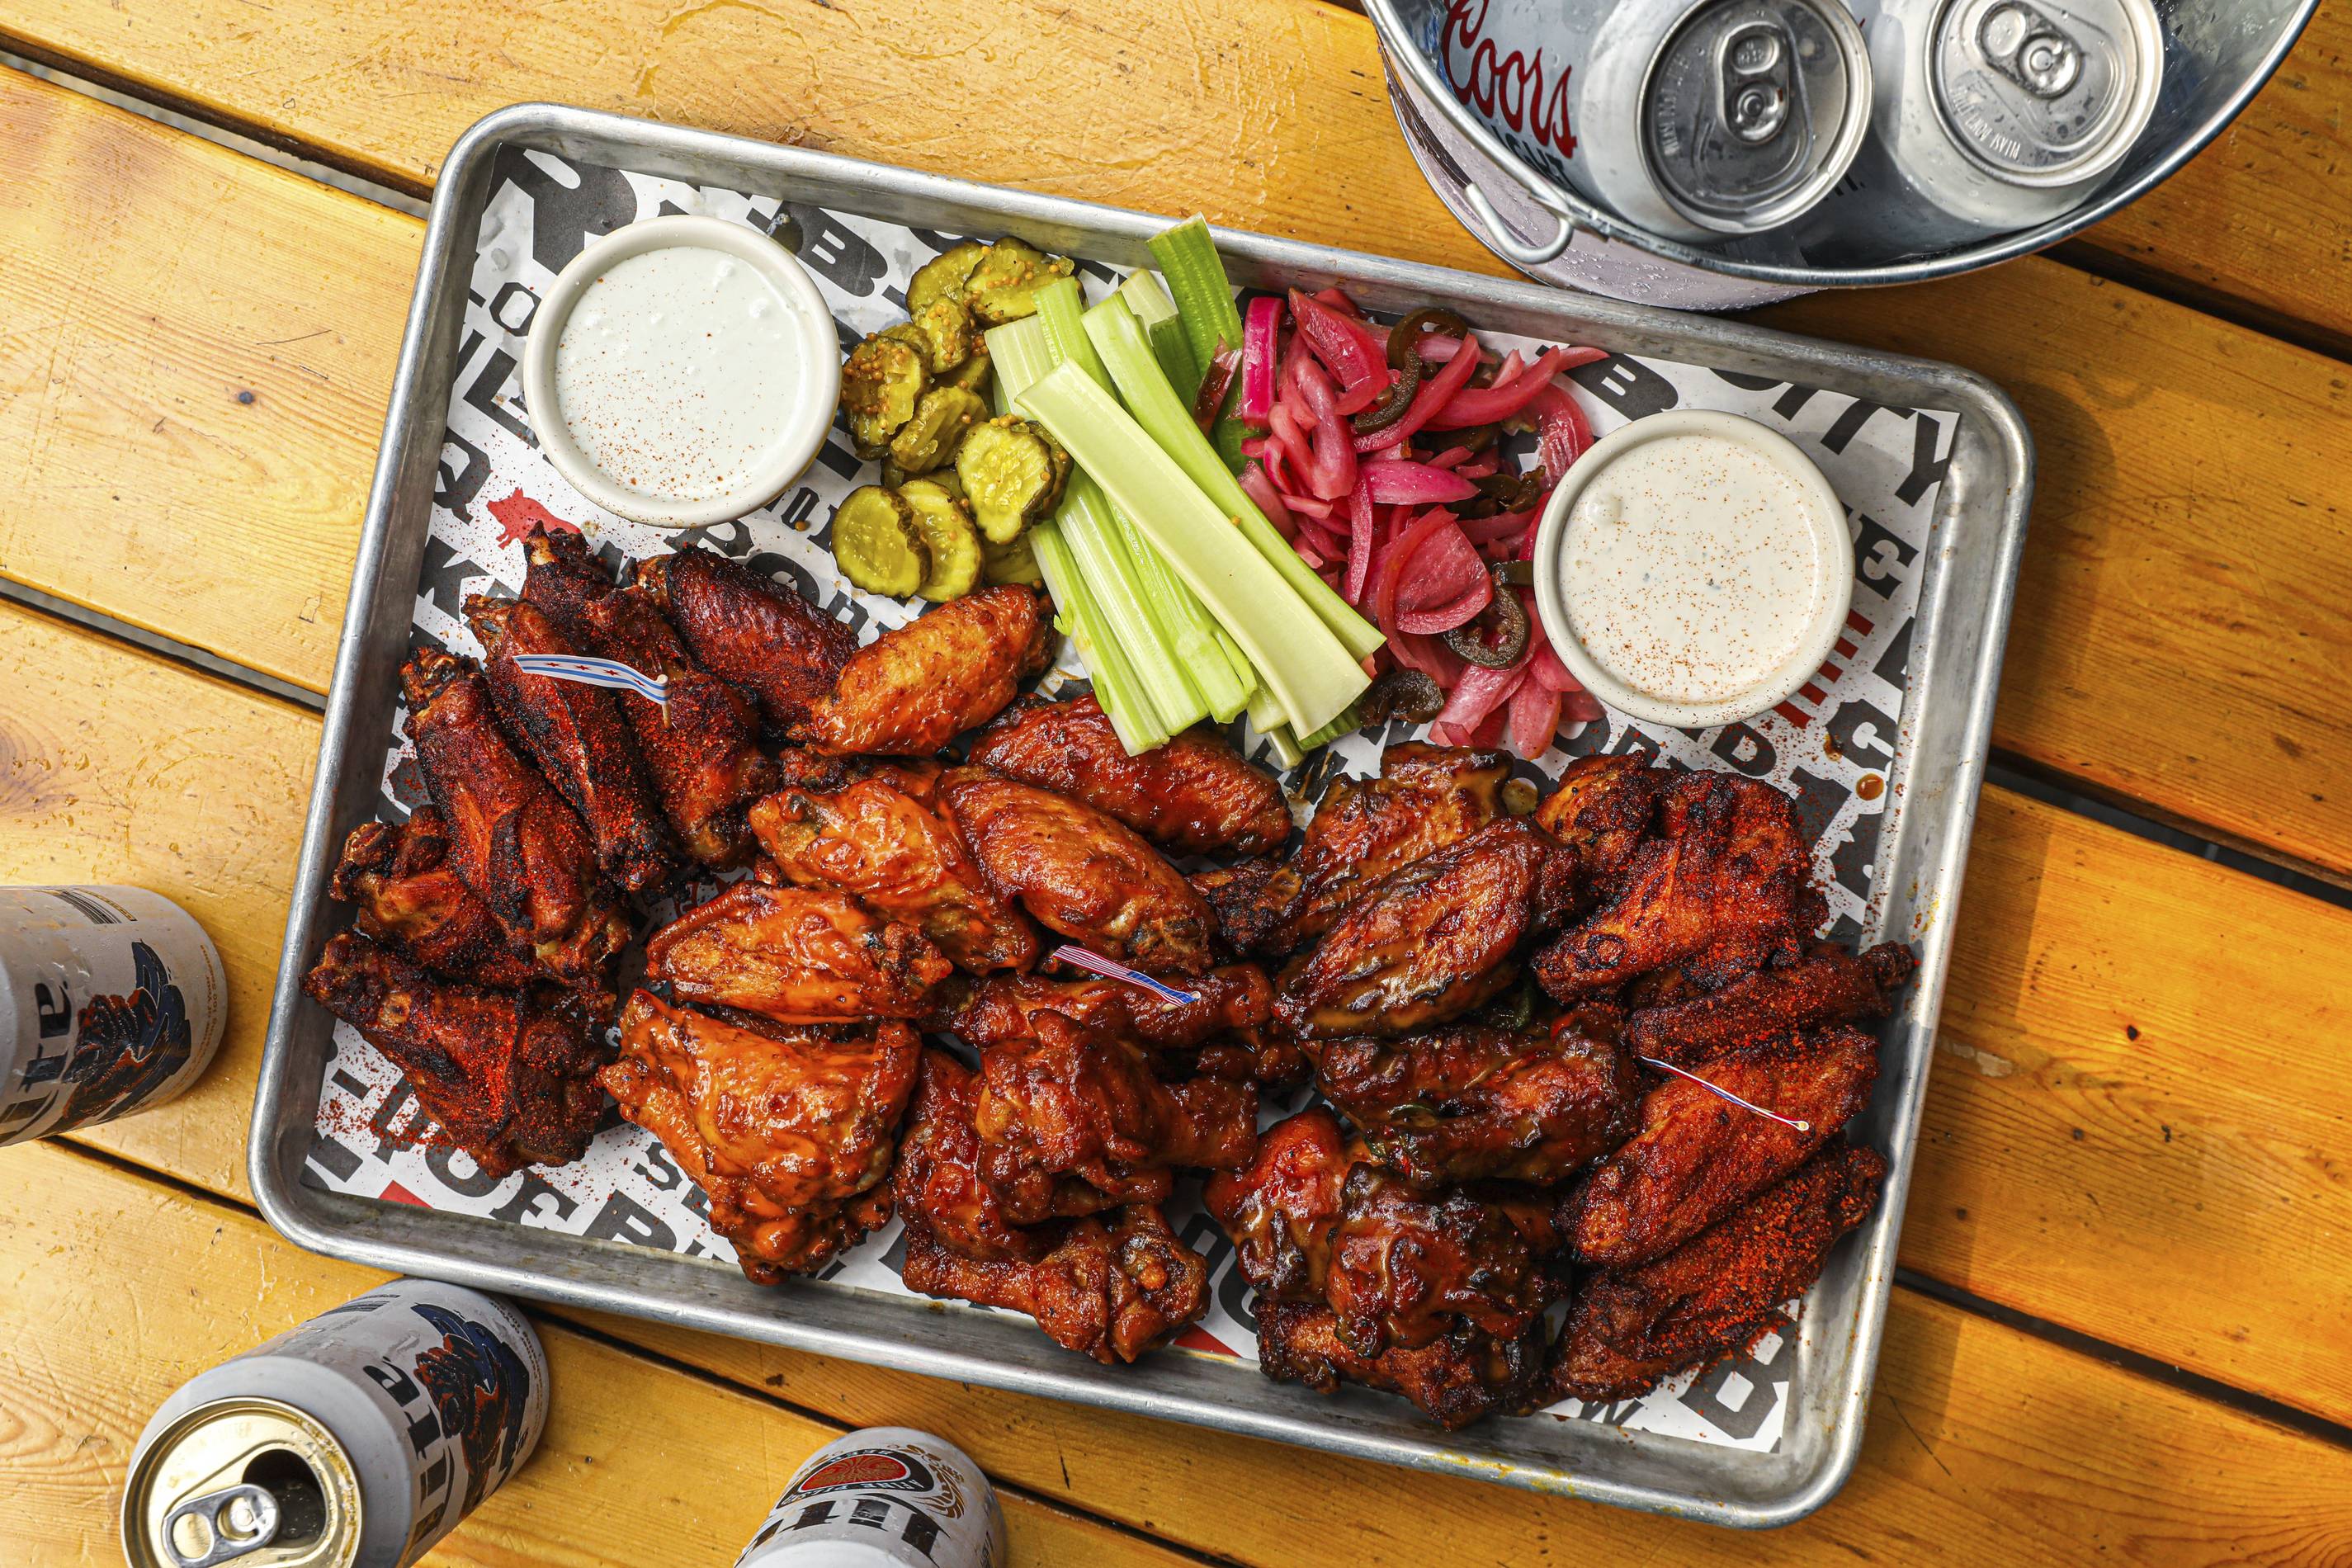 Bes tof Lettuce Delivered Bub City Wing Tray Super Bowl Sunday Chicago